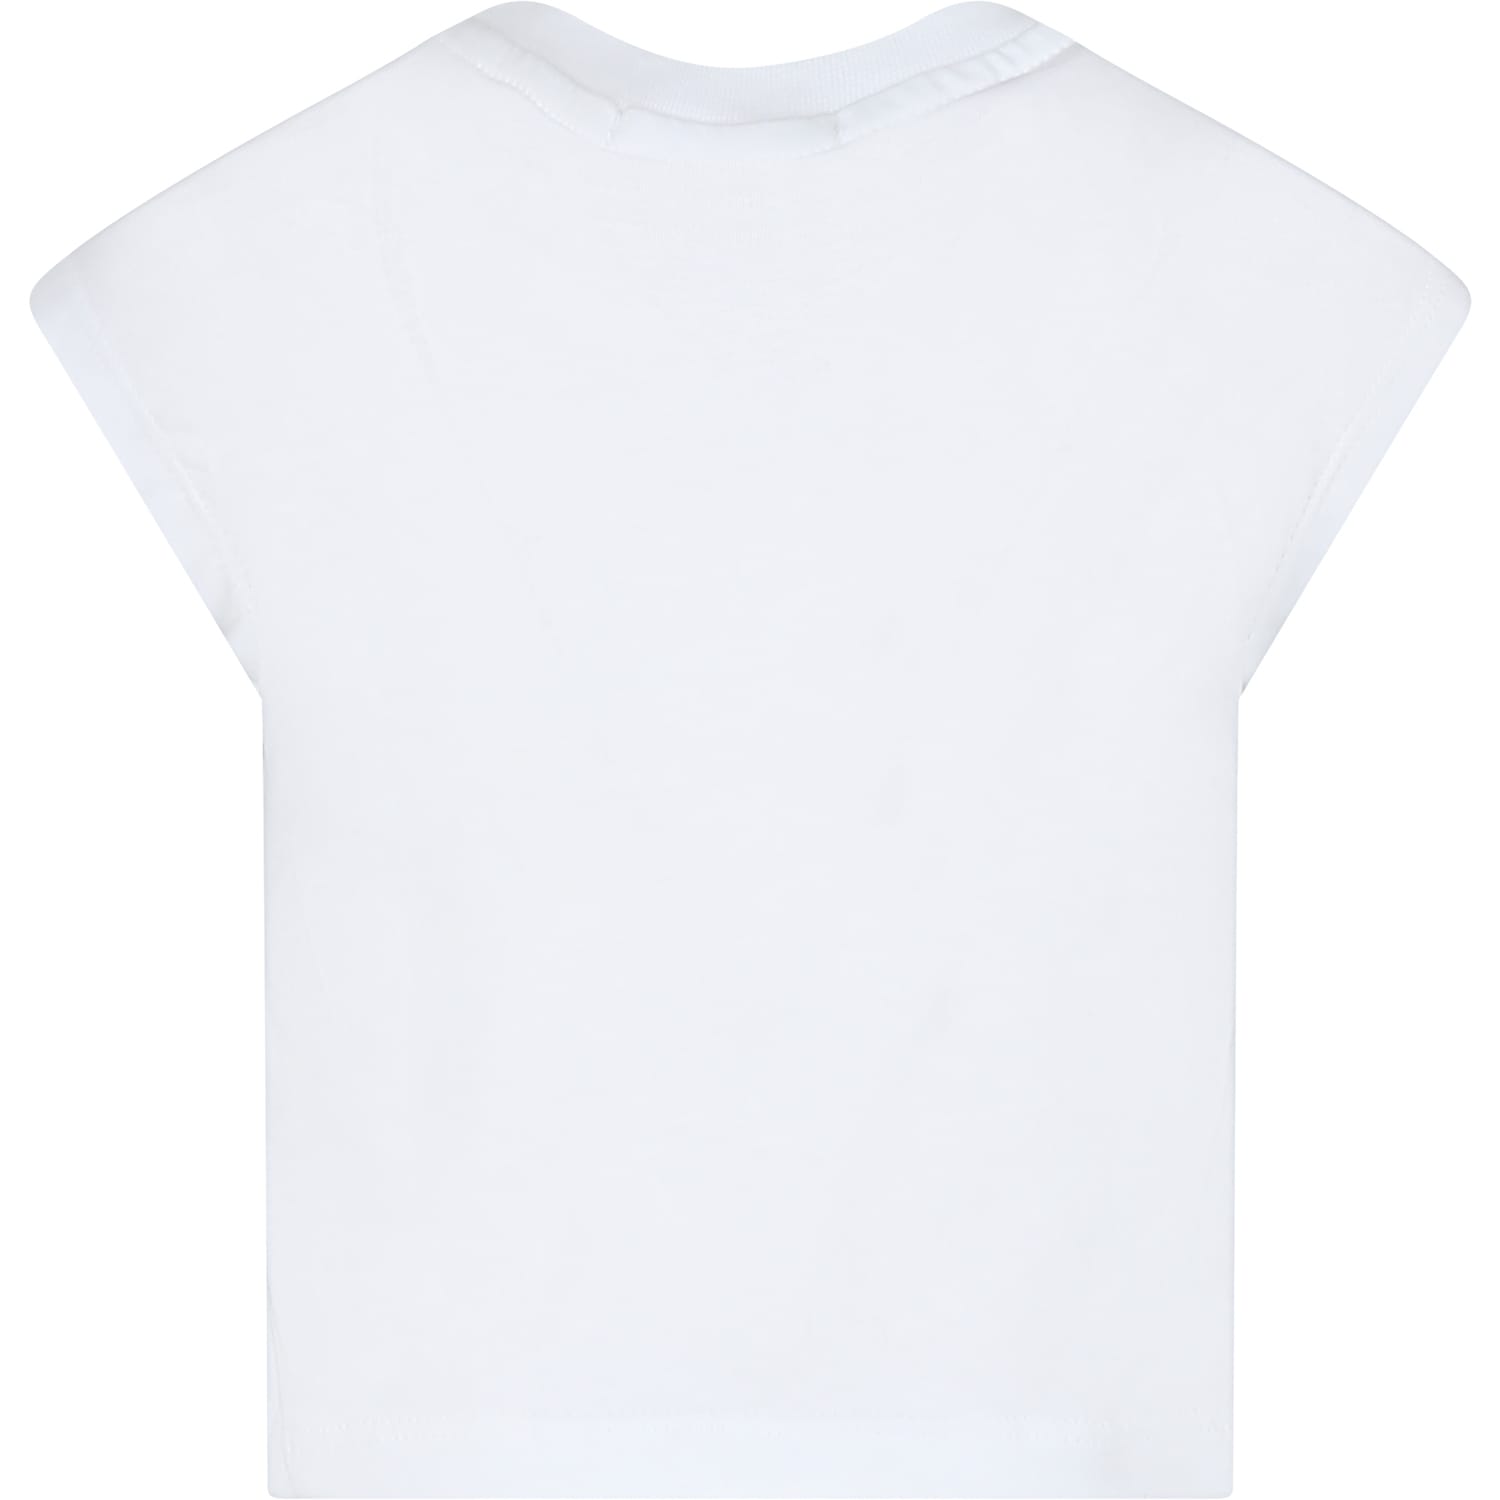 Shop Msgm White T-shirt For Girl With Cherryprint